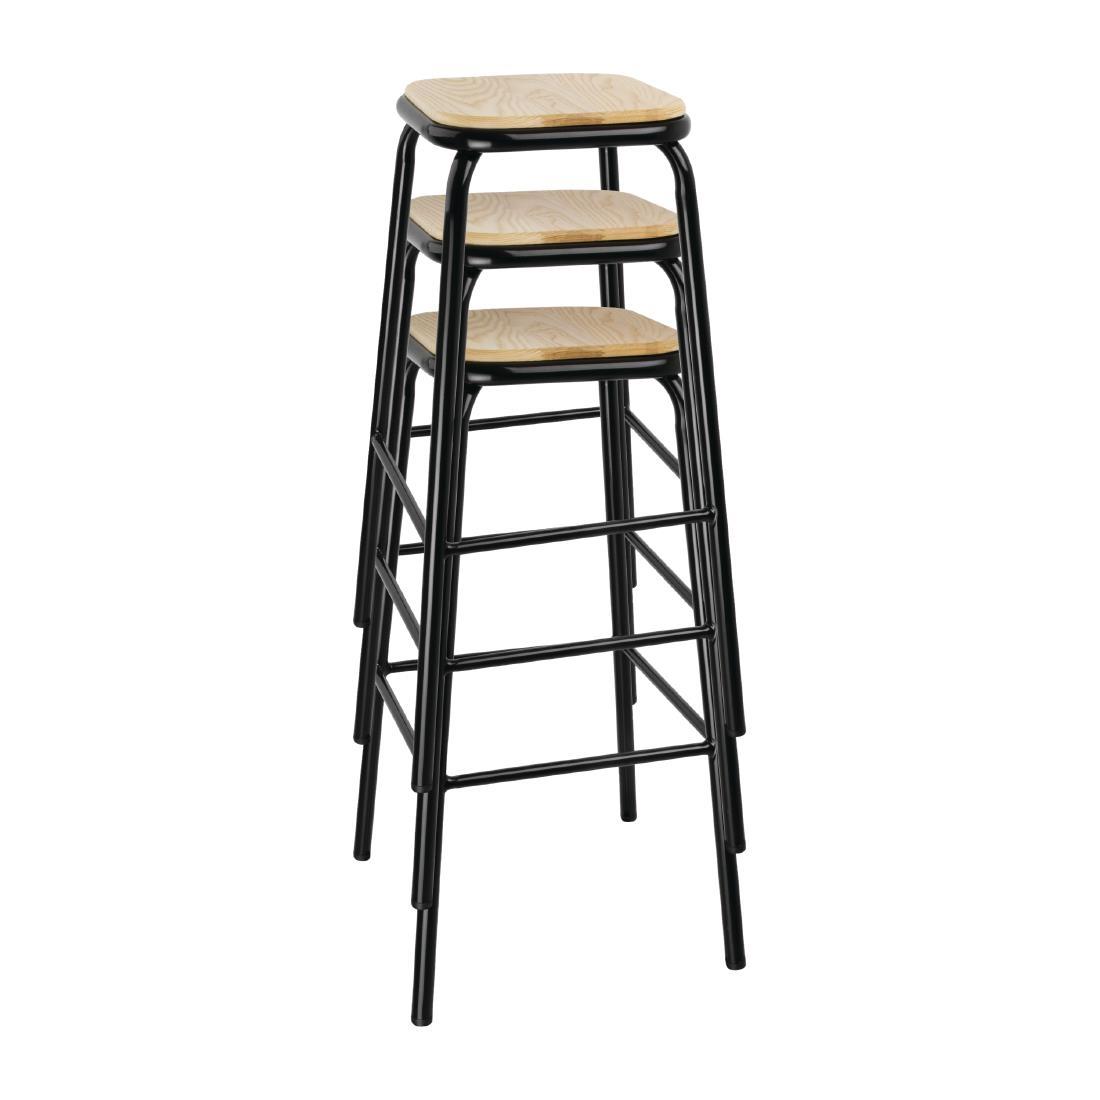 Bolero Cantina High Stools with Wooden Seat Pad Black (Pack of 4) - DE482  - 8